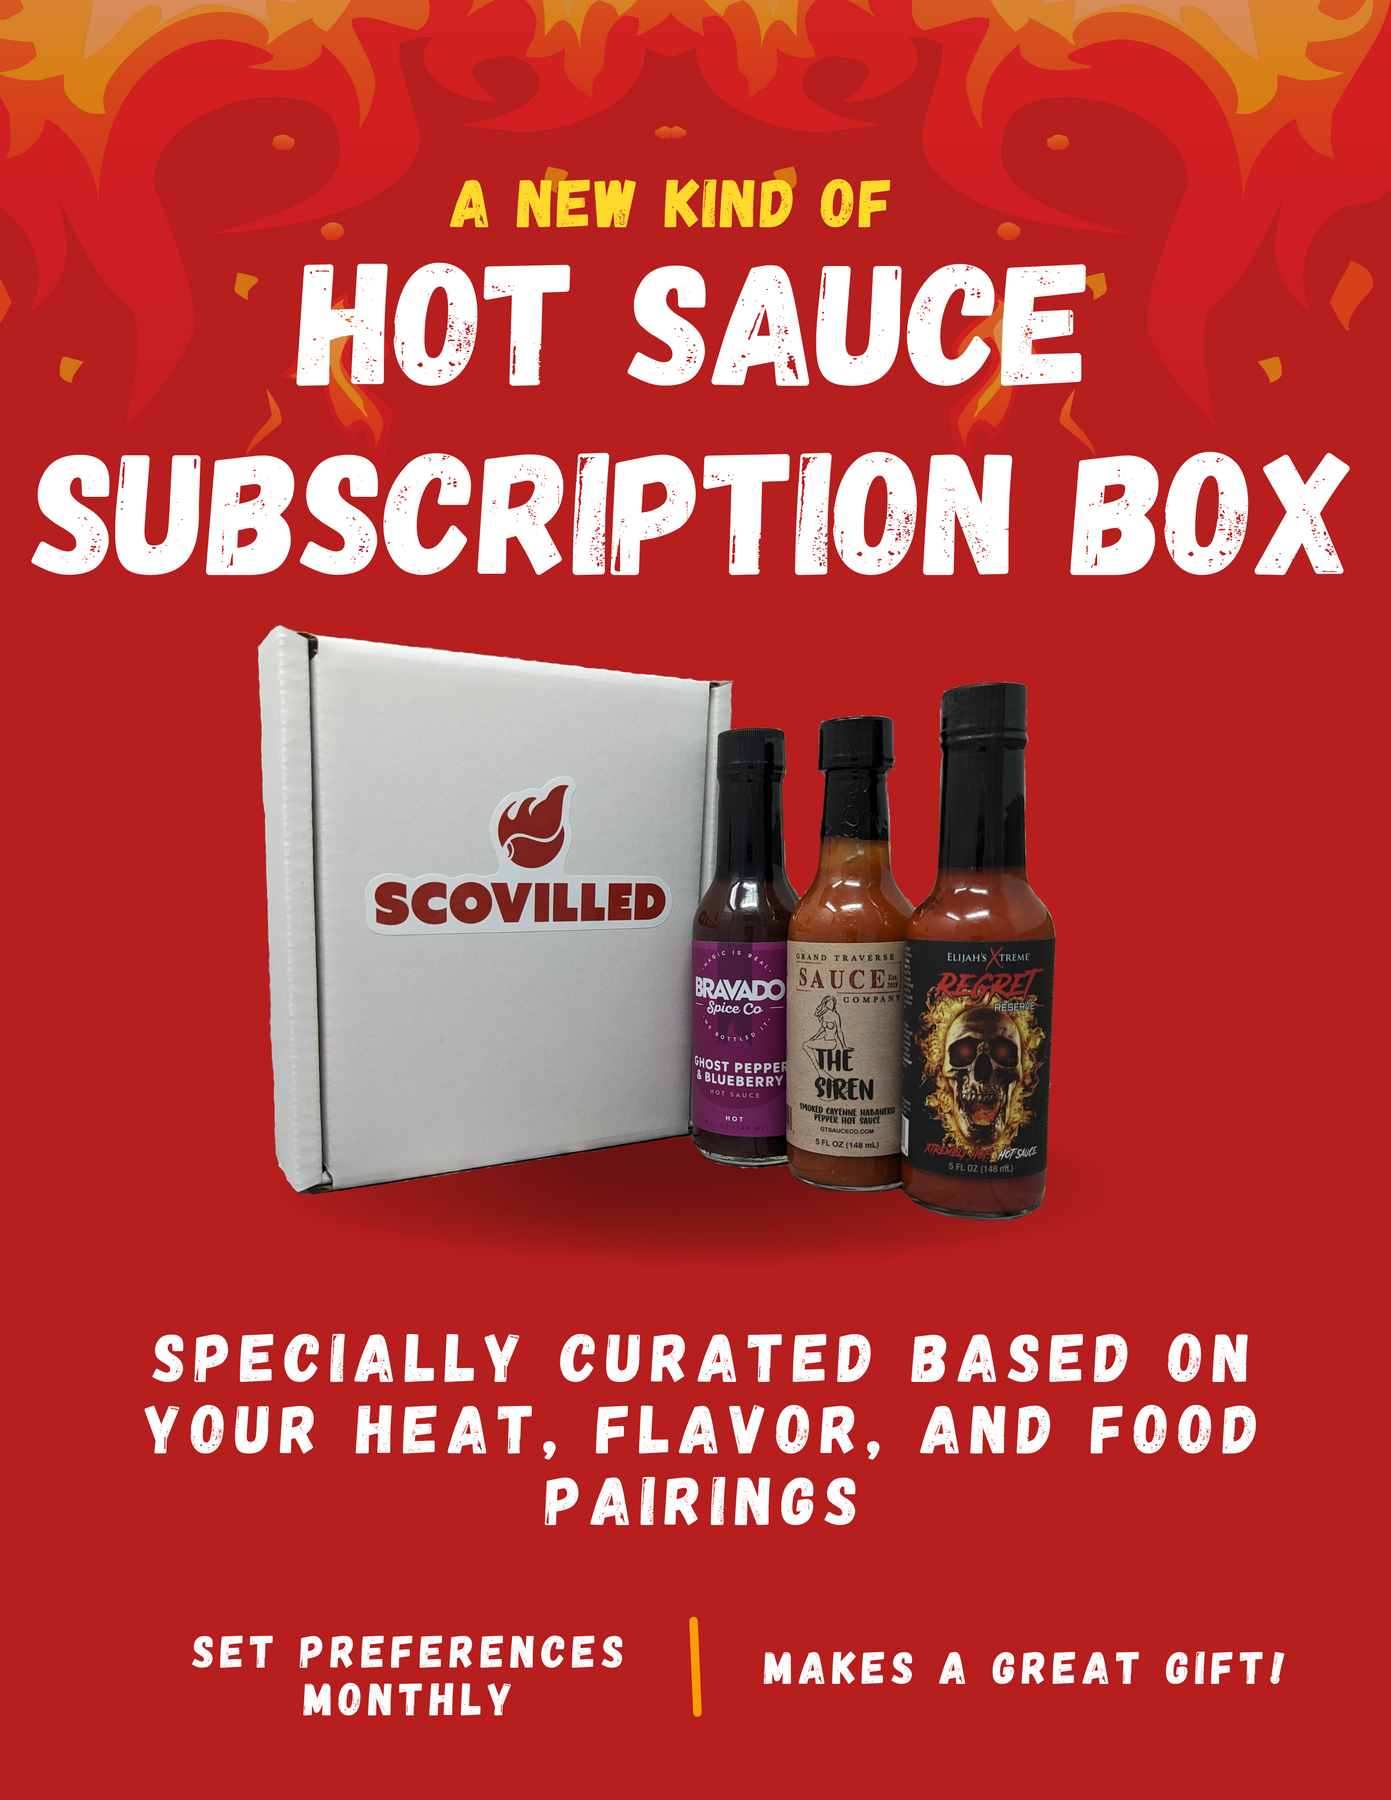 Hot Sauce of the Month Subscription Box – SCOVILLED